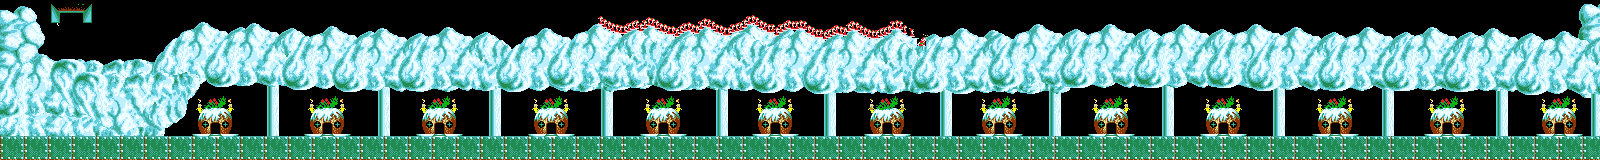 Overview: Holiday Lemmings 1993, Amiga, Blizzard, 3 - Check Your Hints!